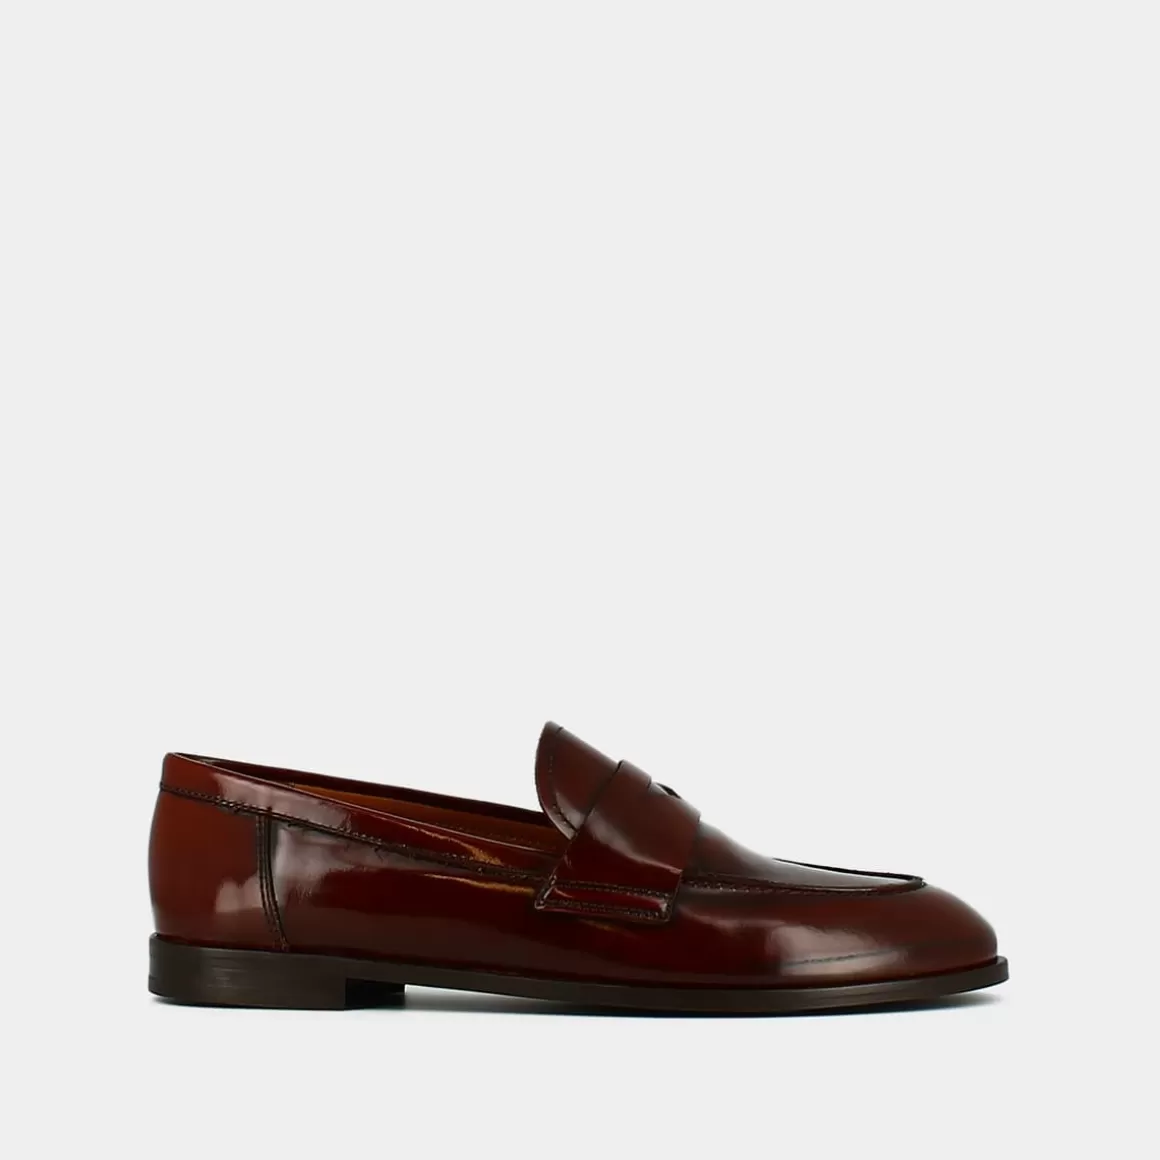 Round-toed loafers<Jonak Outlet